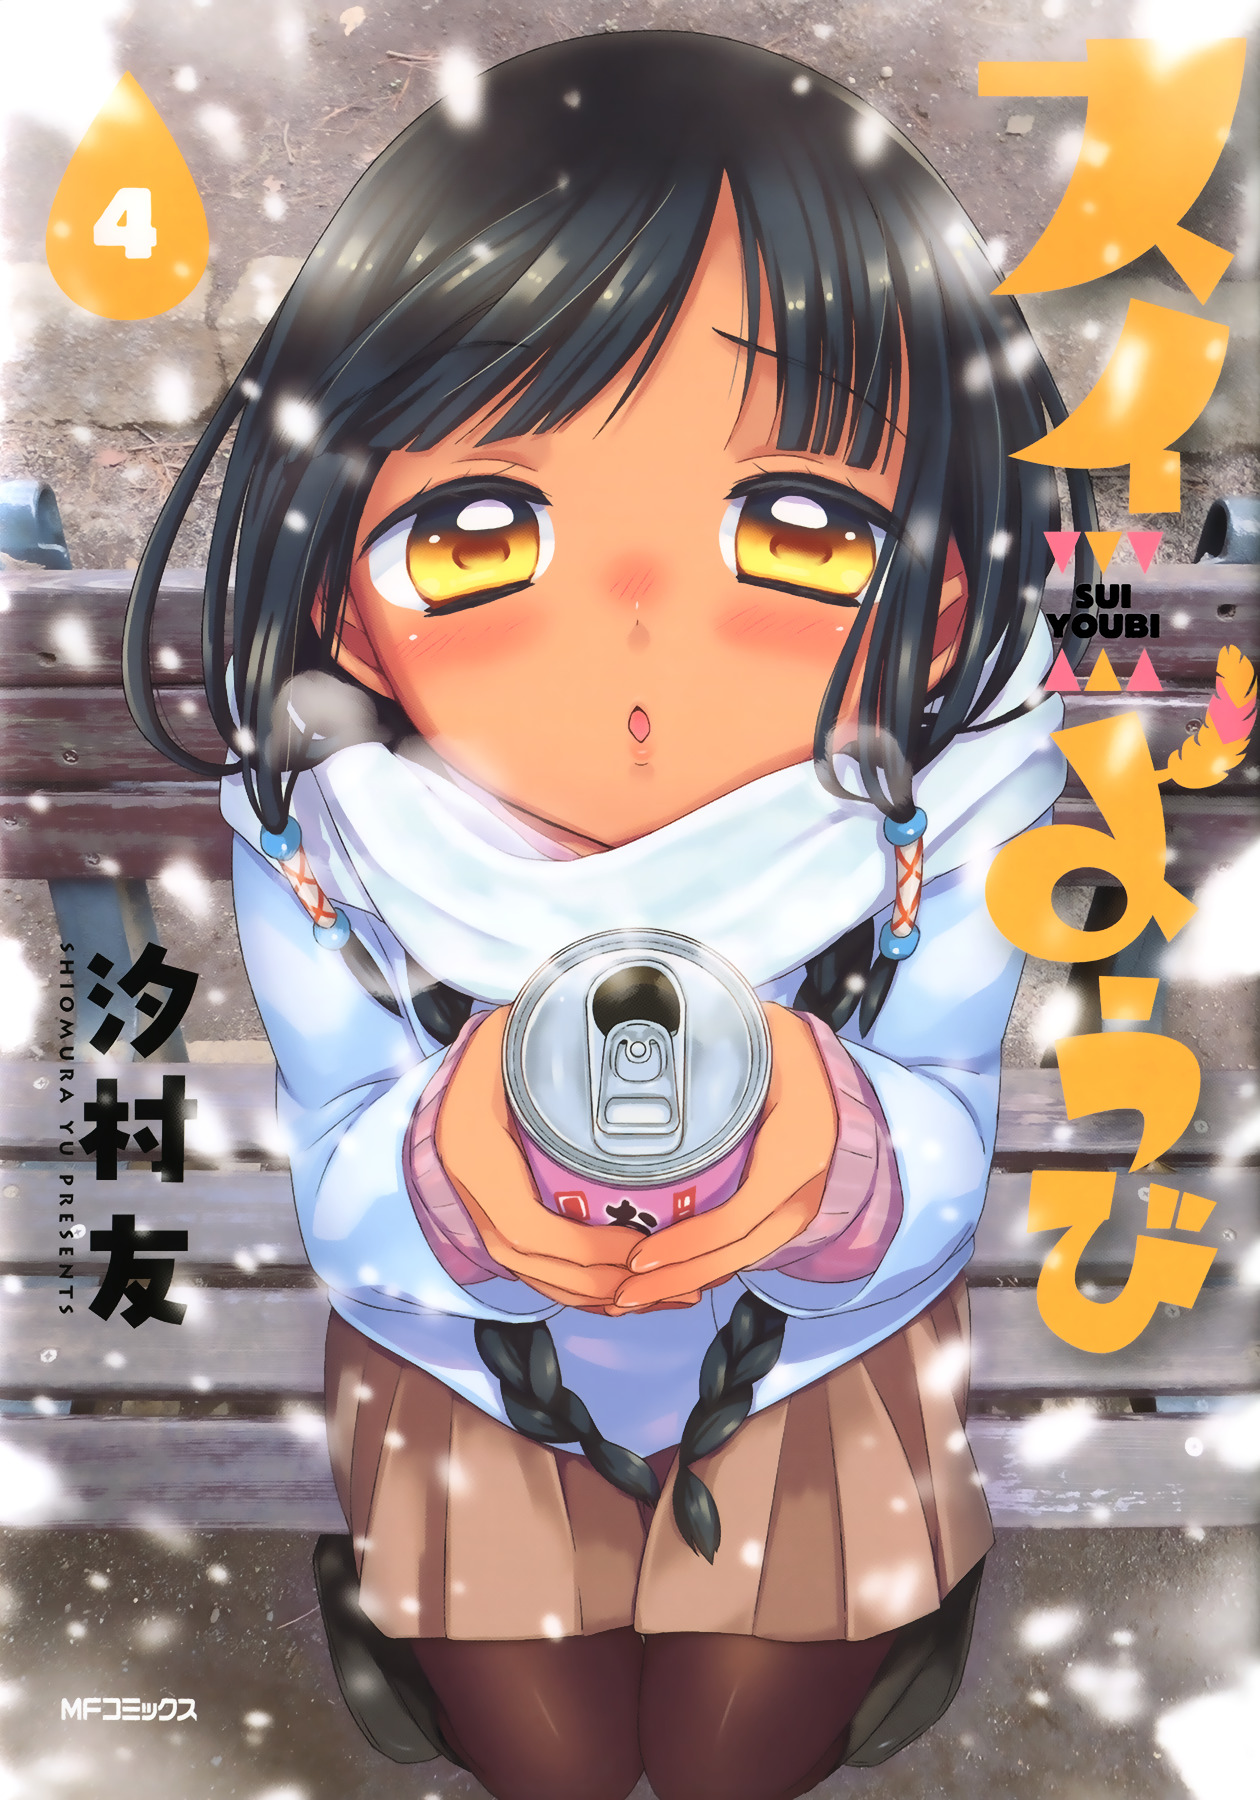 Sui Youbi Chapter 23 #1